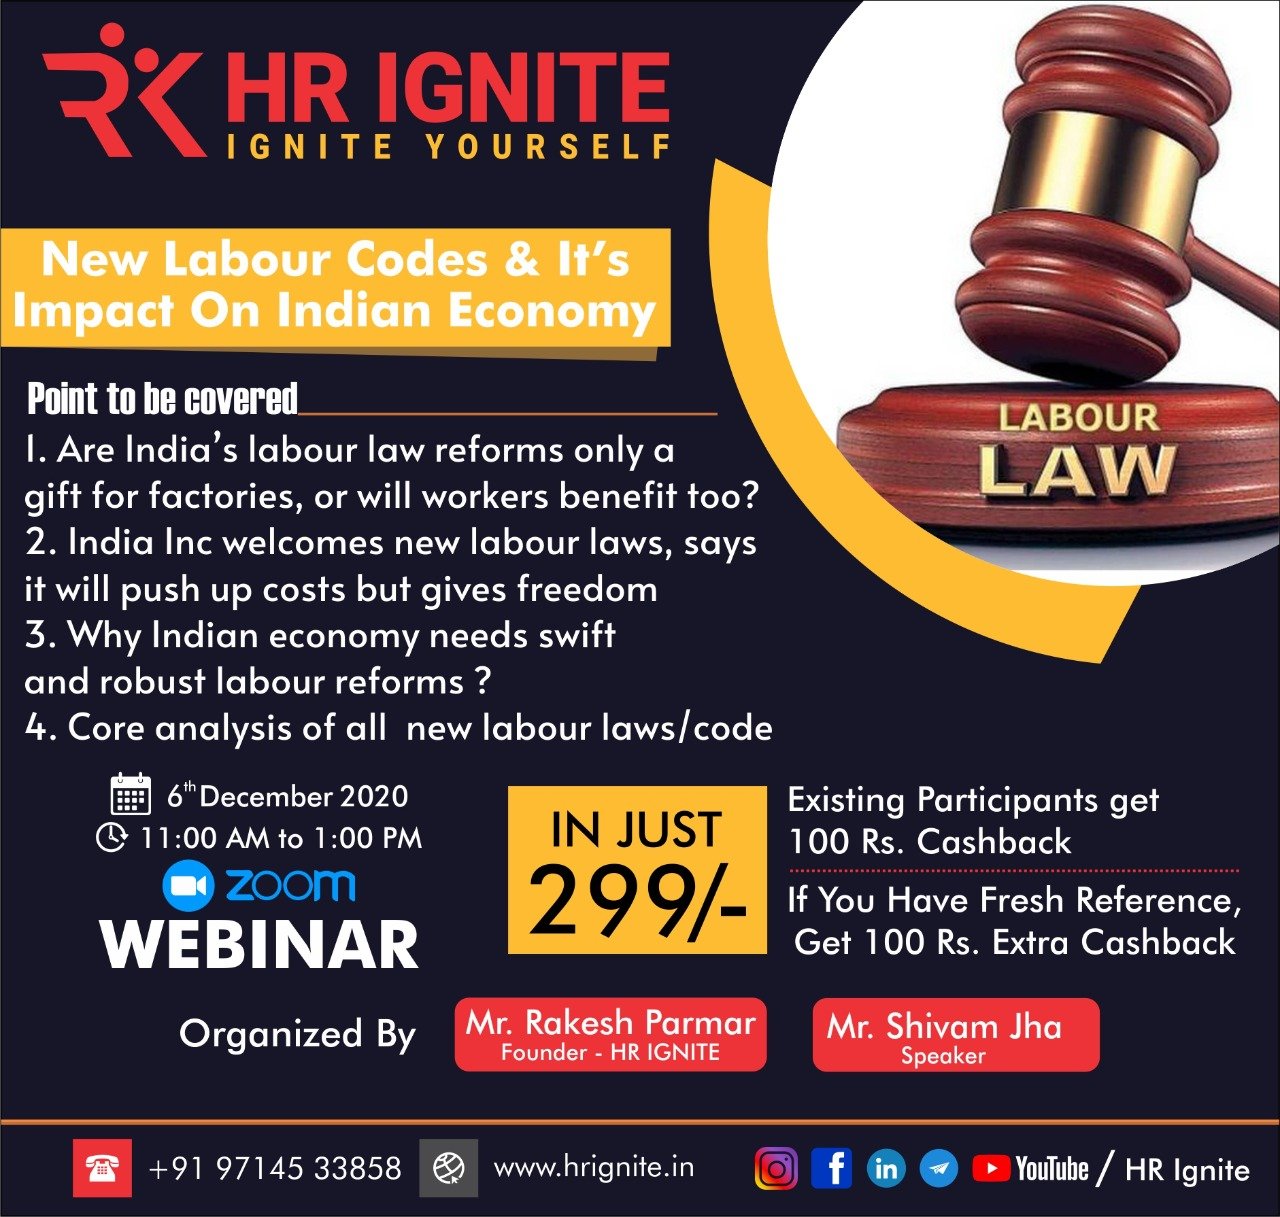 New labour codes & Its Impact on Indian Economy HR IGNITE